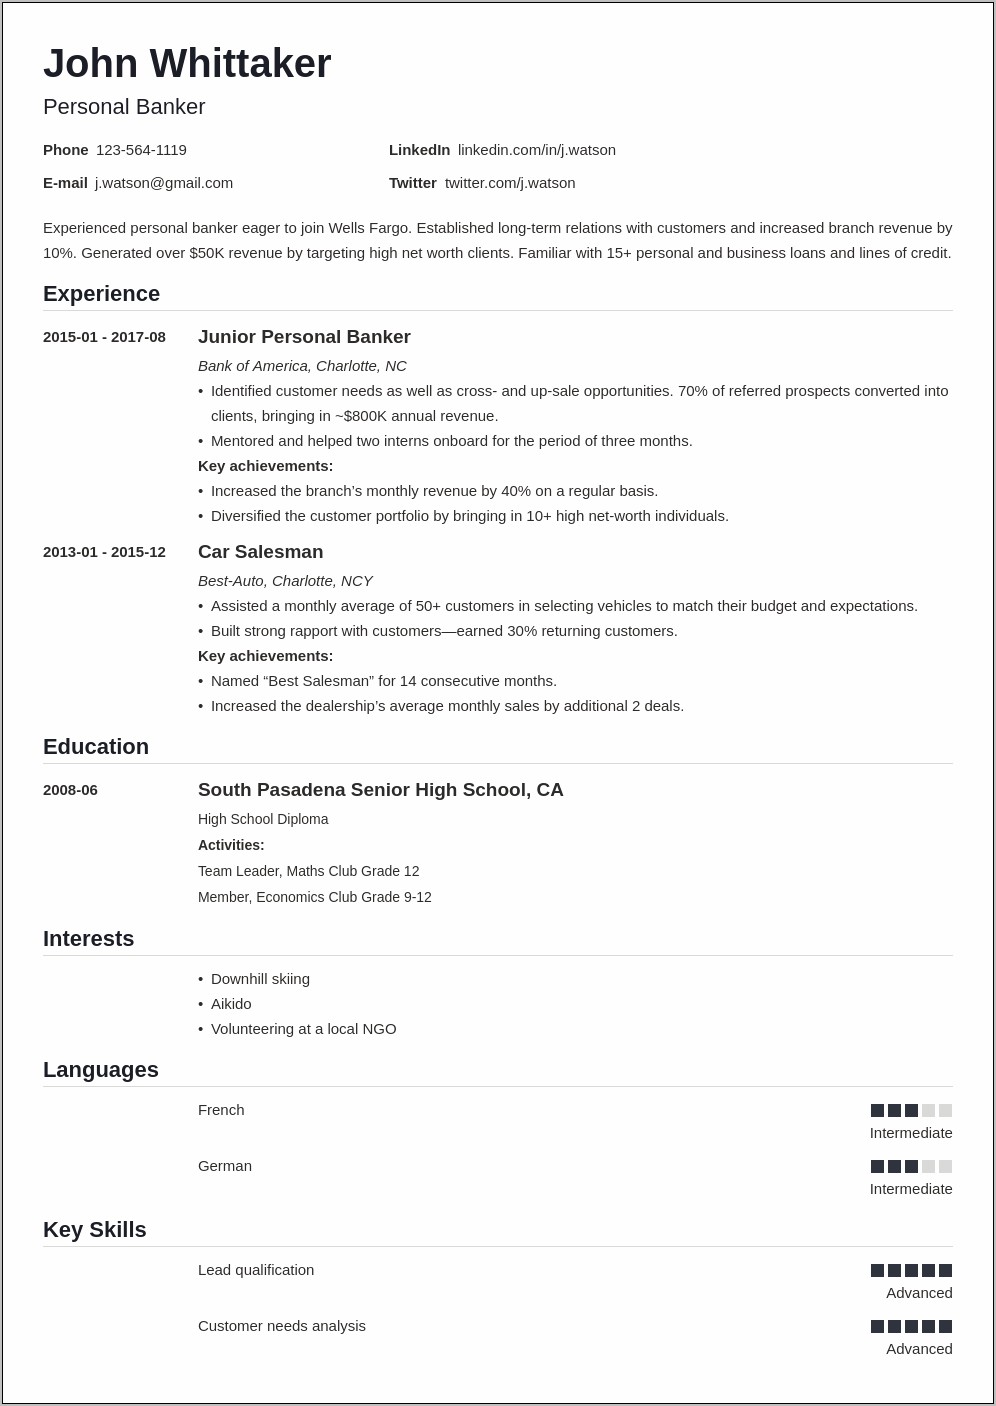 Resume Templates For Bank Jobs